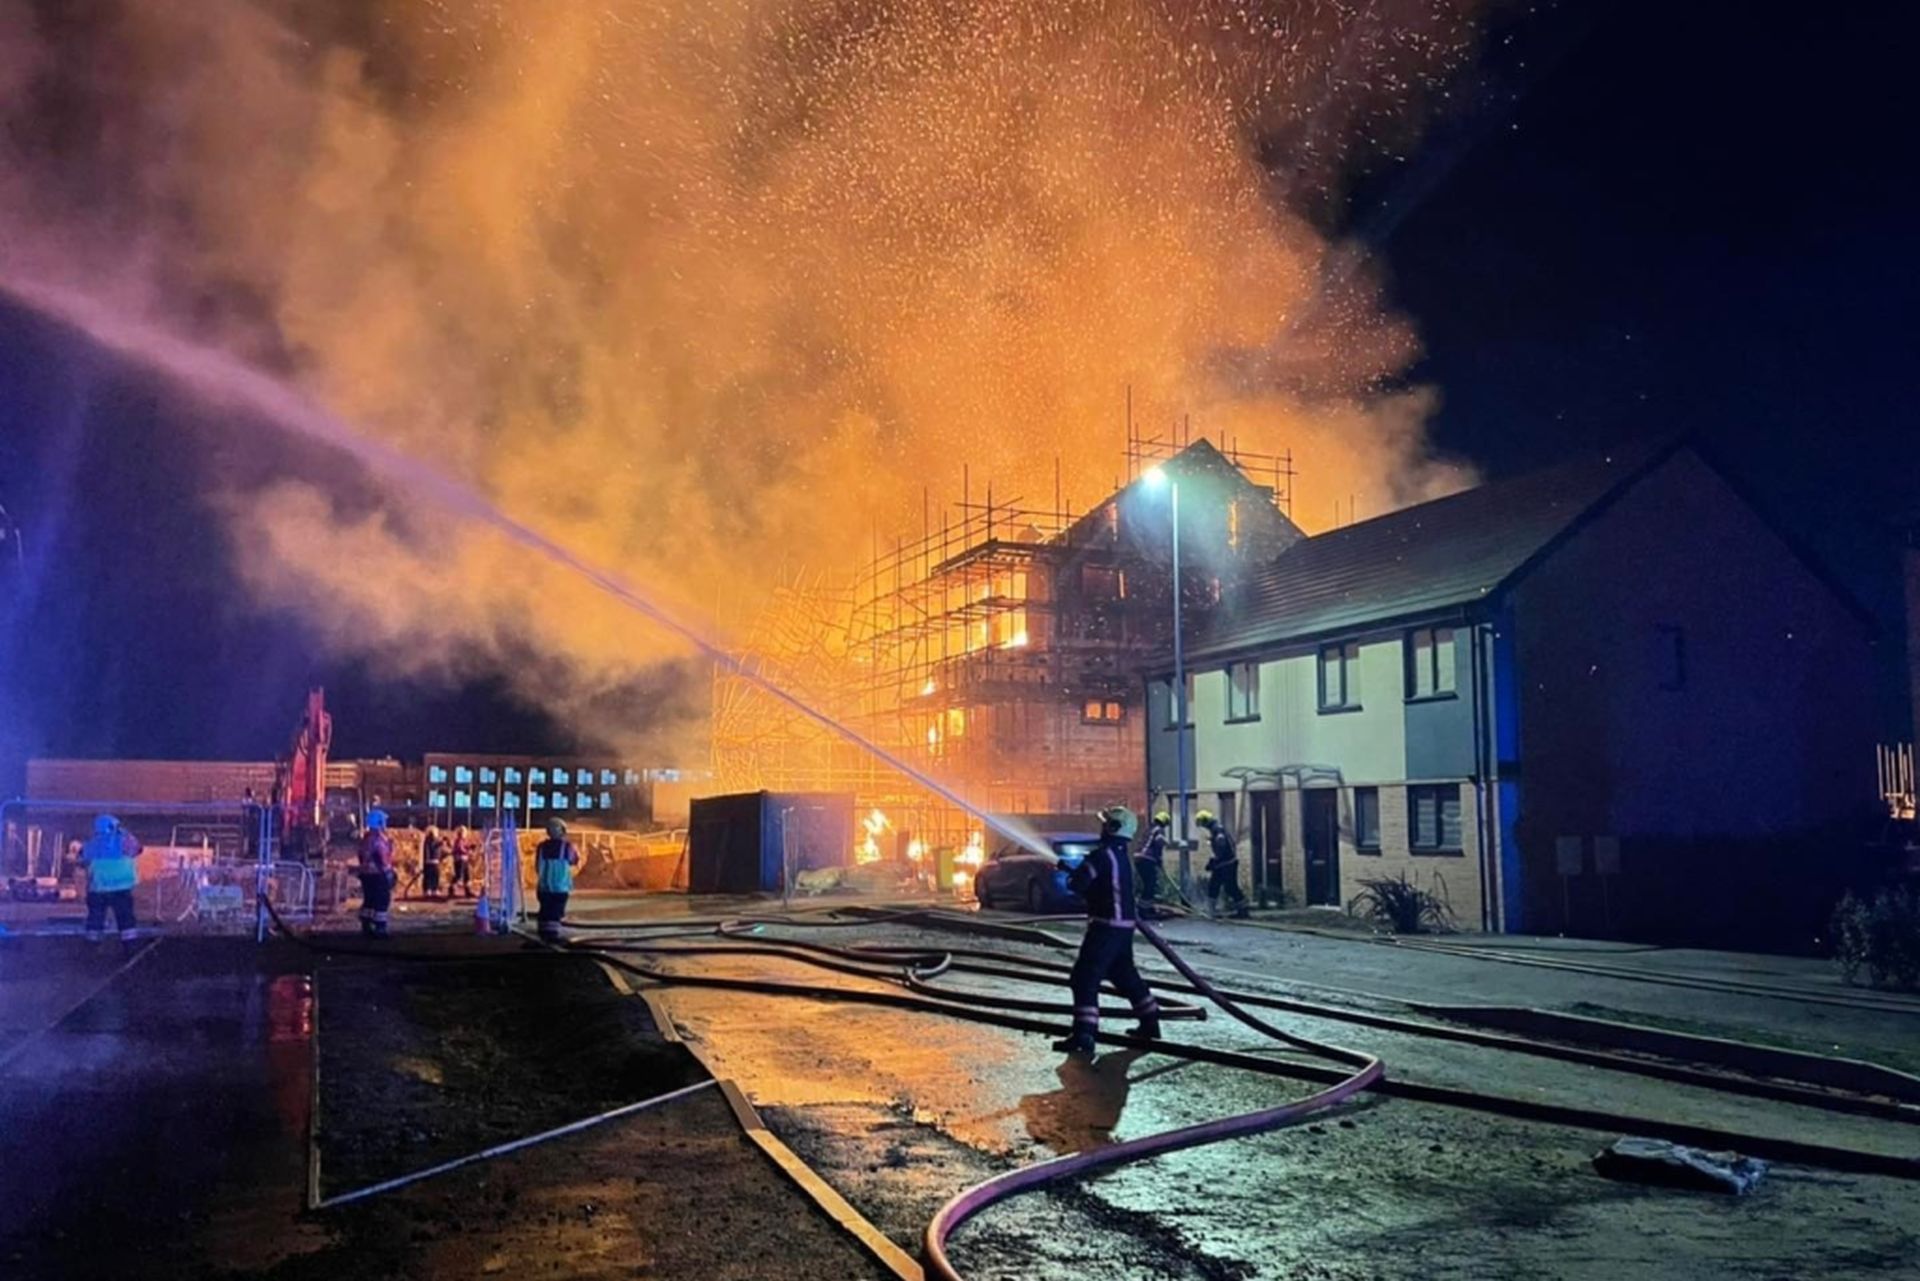 A firefighter tackles the blaze at the Keepmoat Homes site (Image courtesy of Cambridgeshire Fire and Rescue Service)